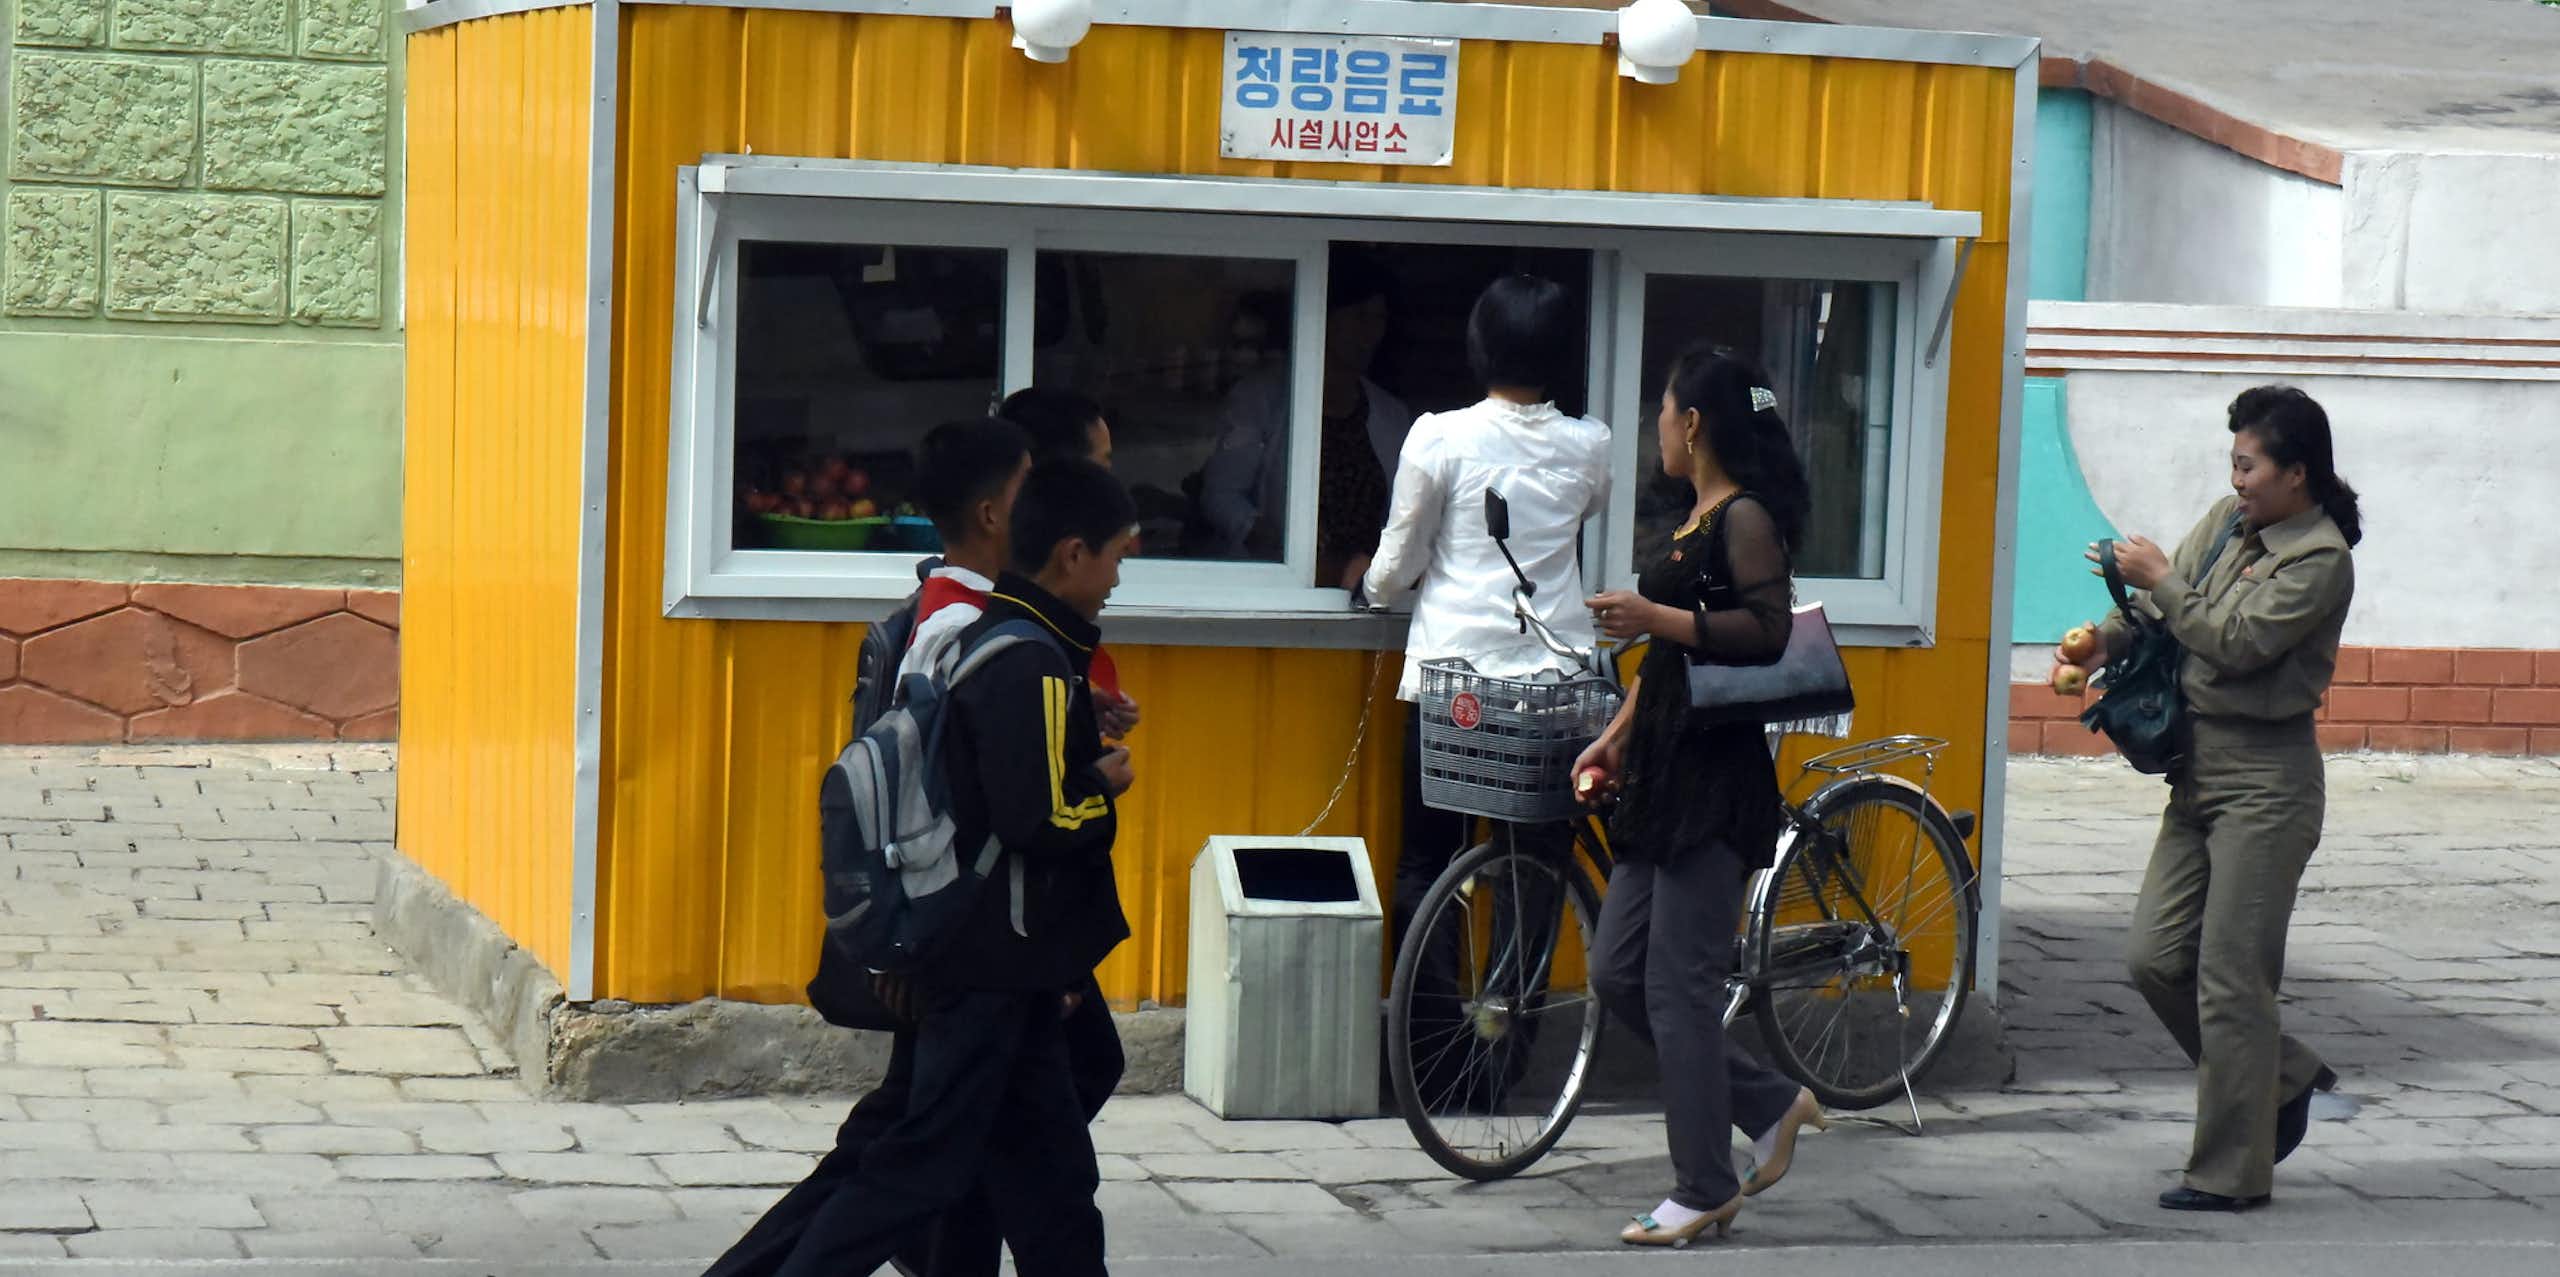 A small shop run by and serving women in North Korea. 